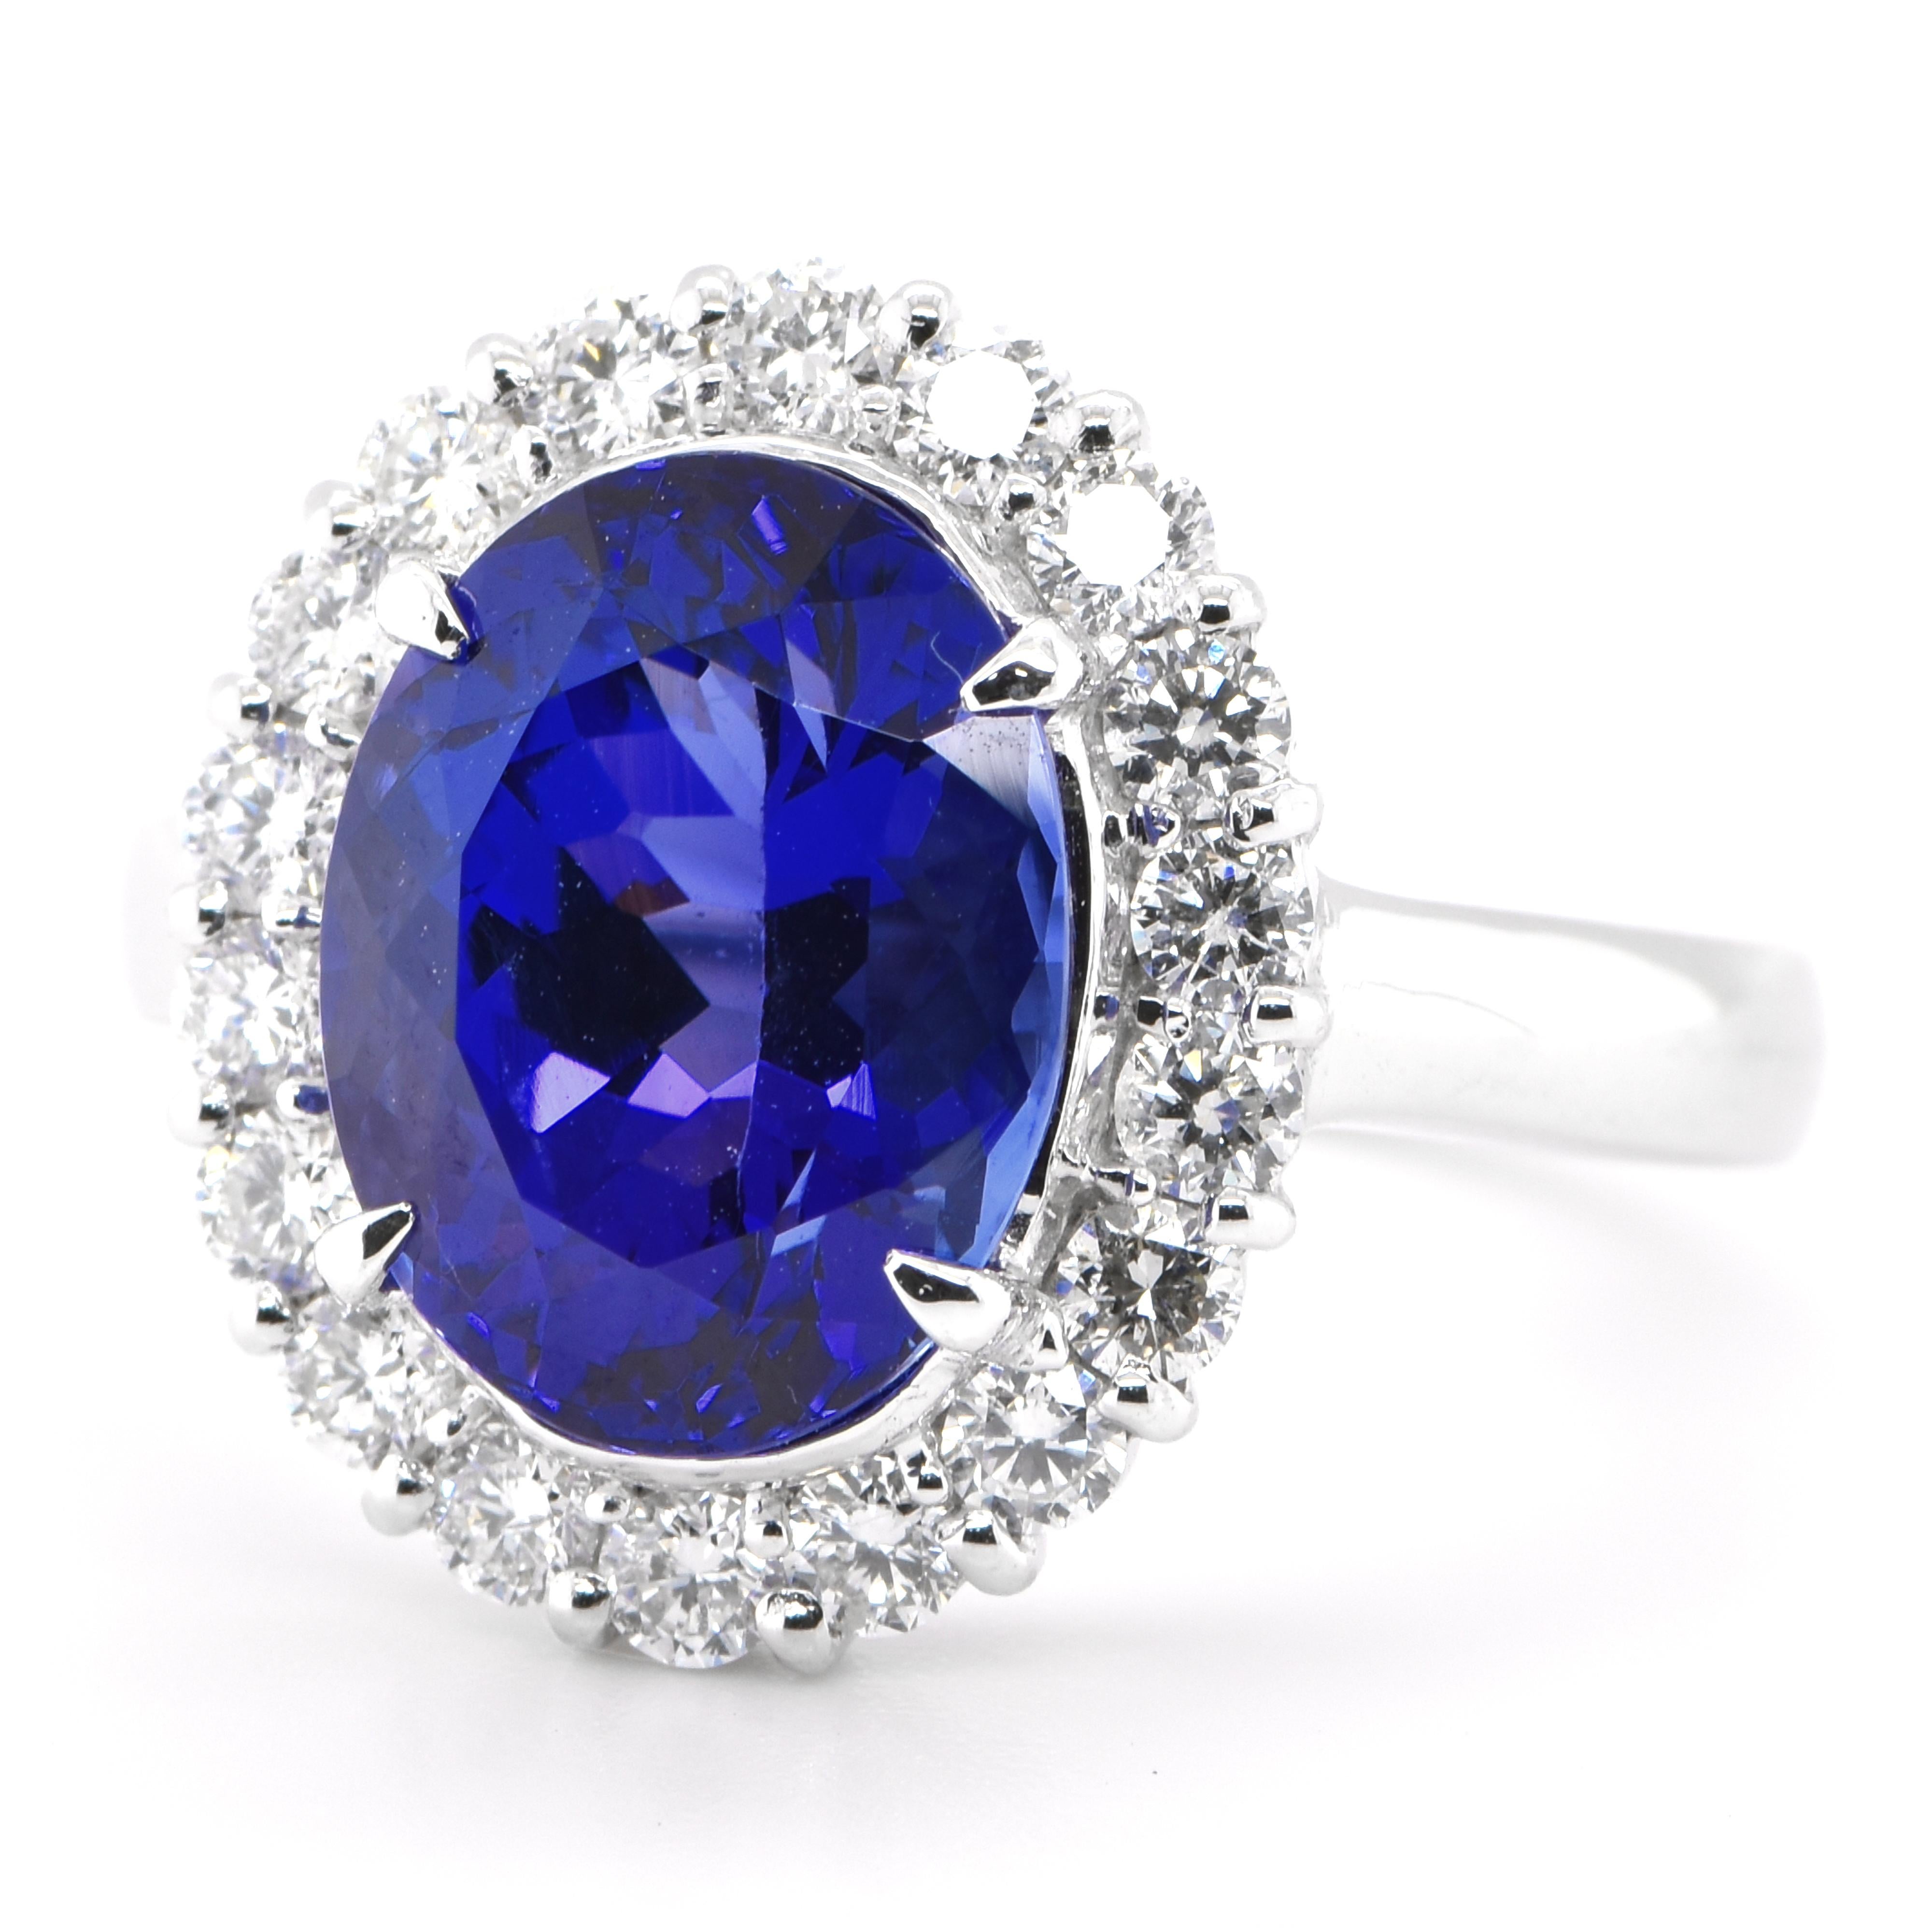 A beautiful Cocktail Ring featuring a 4.63 Carat Natural Tanzanite and 0.72 Carats of Diamond Accents set in Platinum. Tanzanite's name was given by Tiffany and Co after its only known source: Tanzania. Tanzanite displays beautiful pleochroic colors